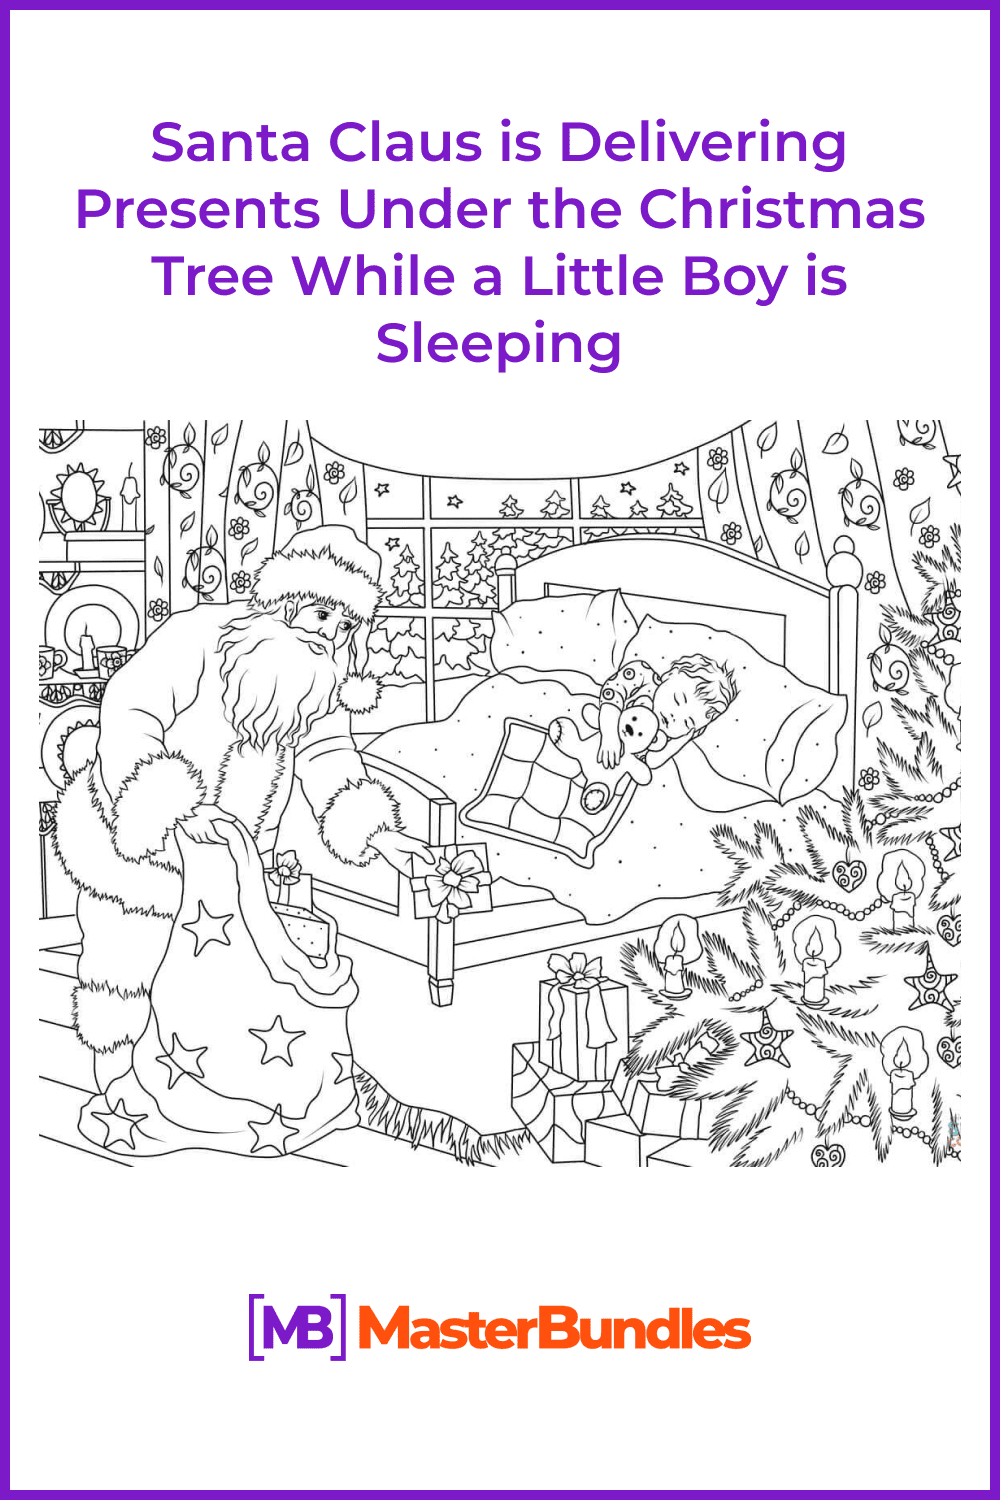 Santa Claus is delivering presents under the Christmas tree while a little boy is pinterest image.